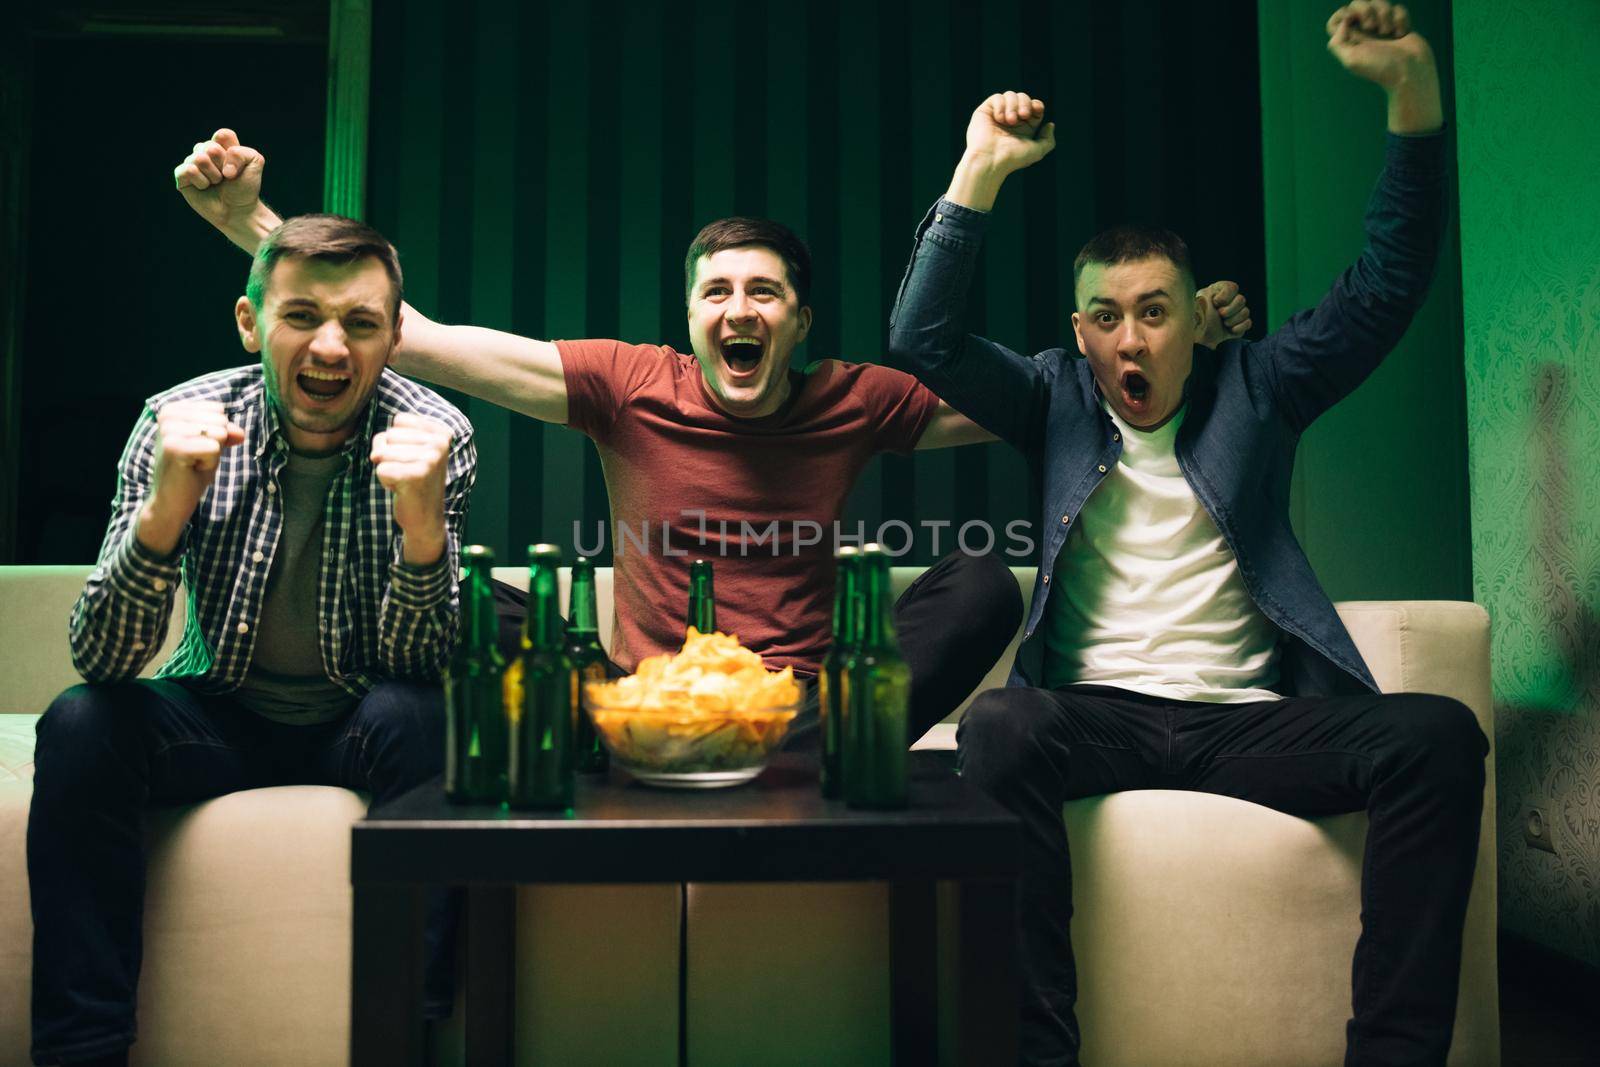 Cheerful happy Caucasian guys cheering for favorite team. Loyal football fans supporting their team. Men watching TV with sport channel late at night and drinking beer.